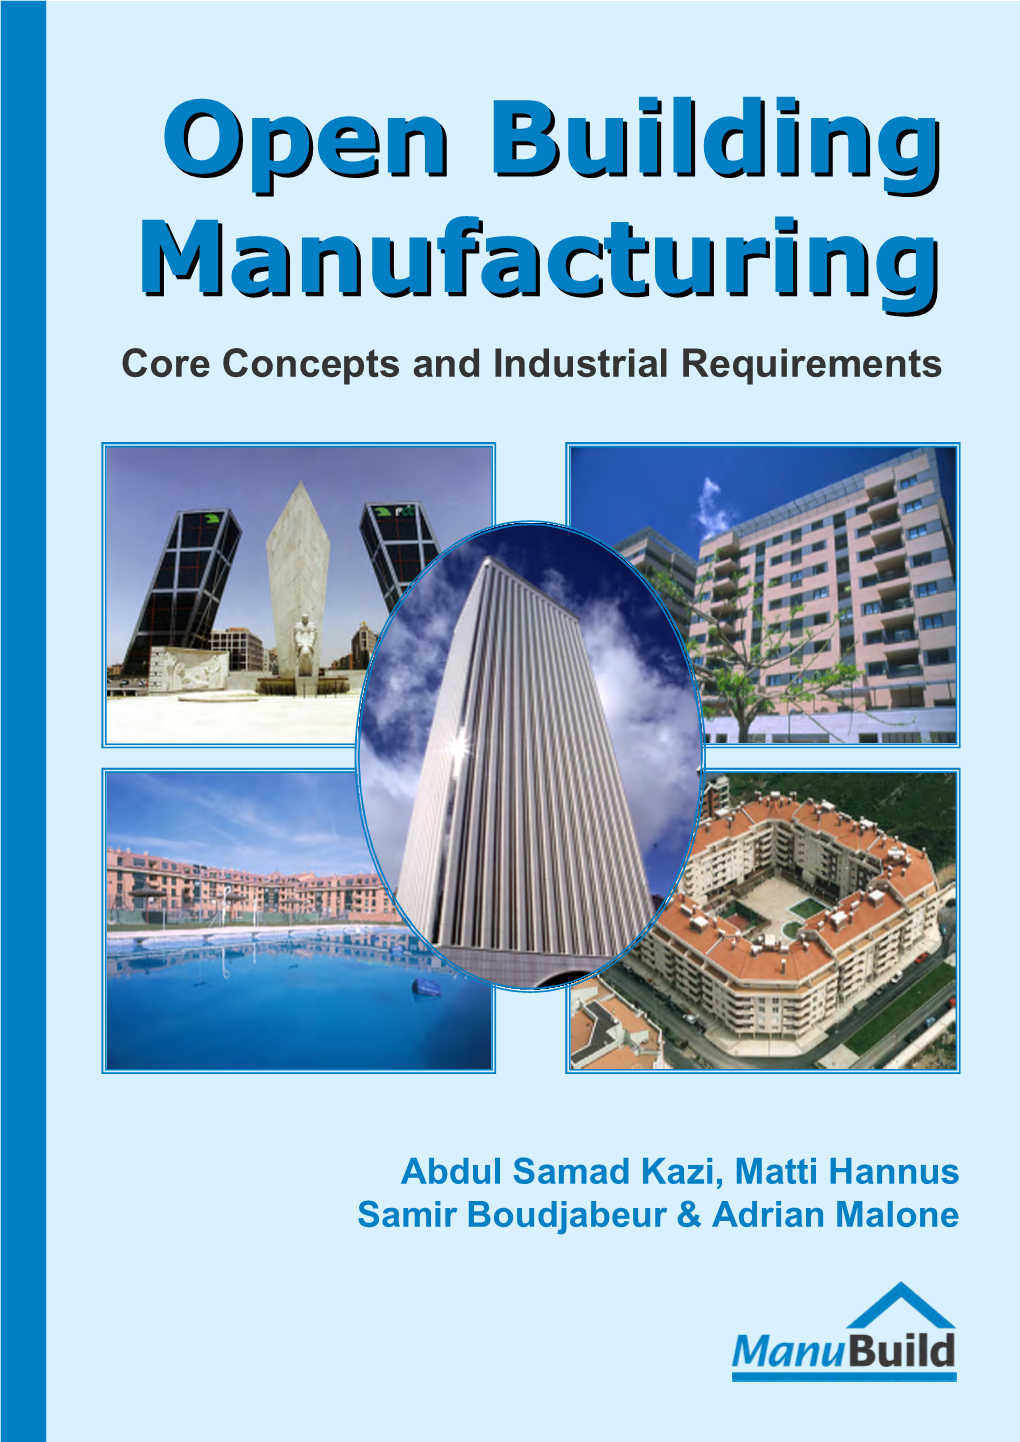 Open Building Manufacturing Core Concepts and Industrial Requirements